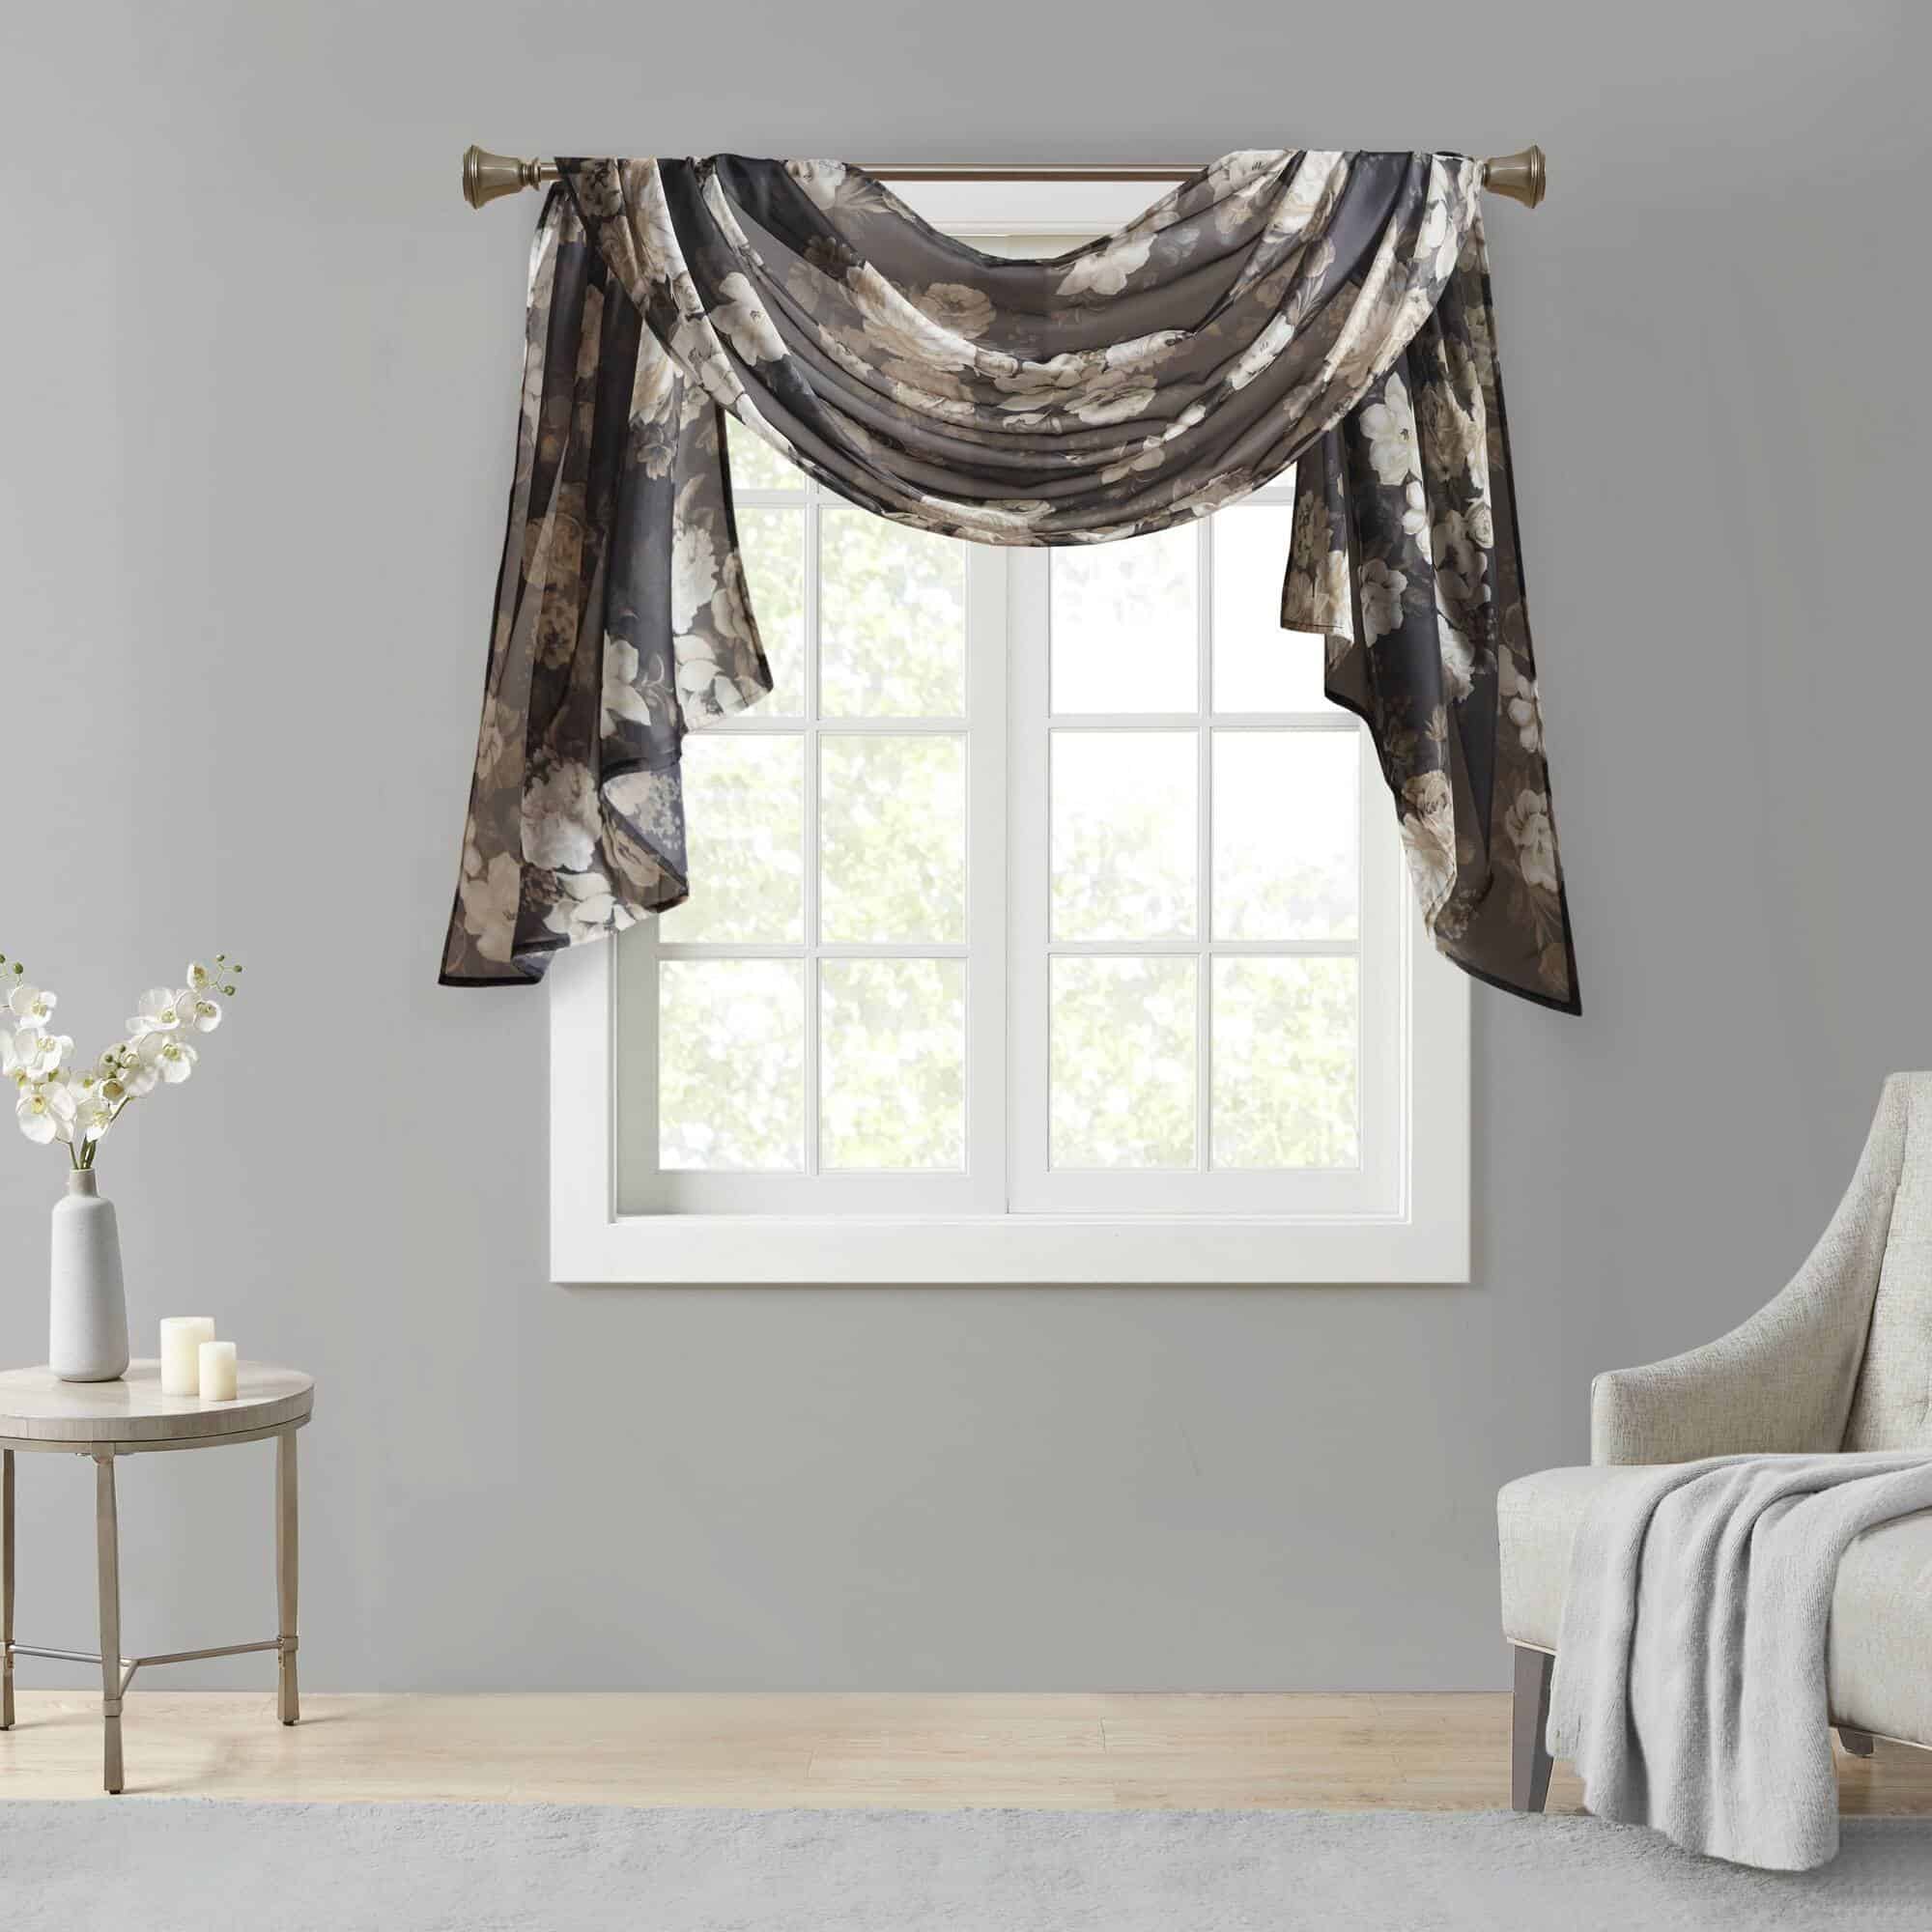 Enrich Rooms With Curtain Scarfs For a Romantic Atmosphere